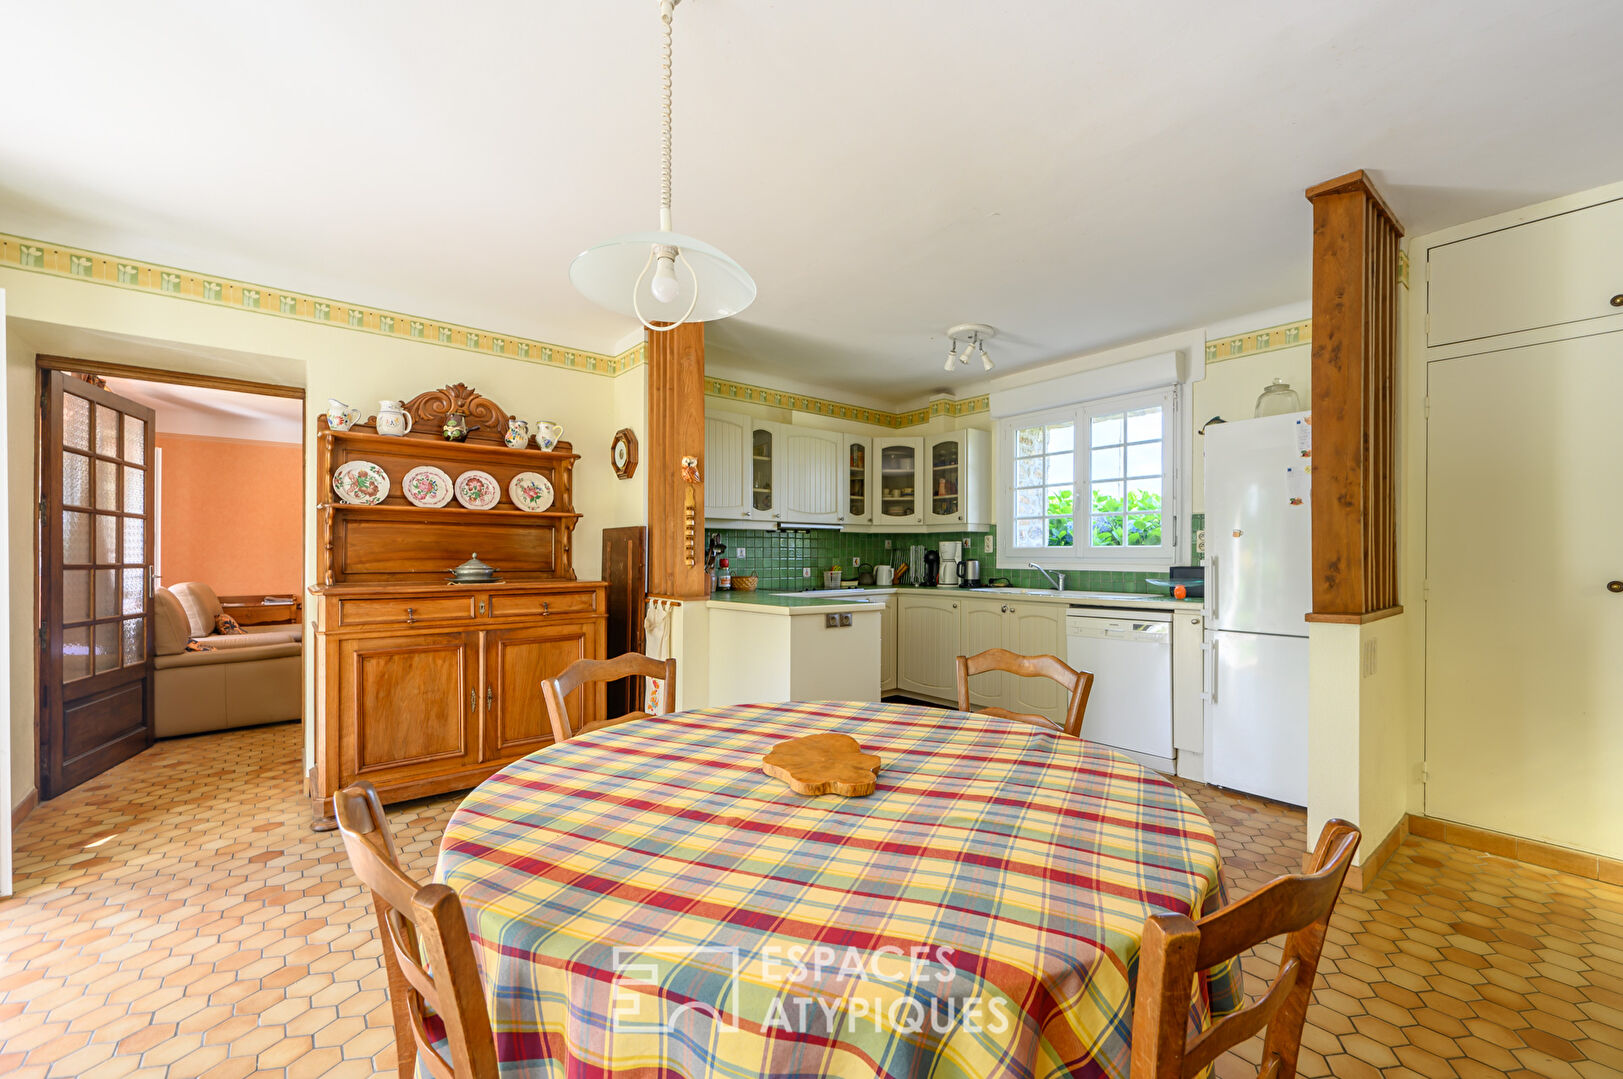 Charming farmhouse in the heart of a quiet hamlet